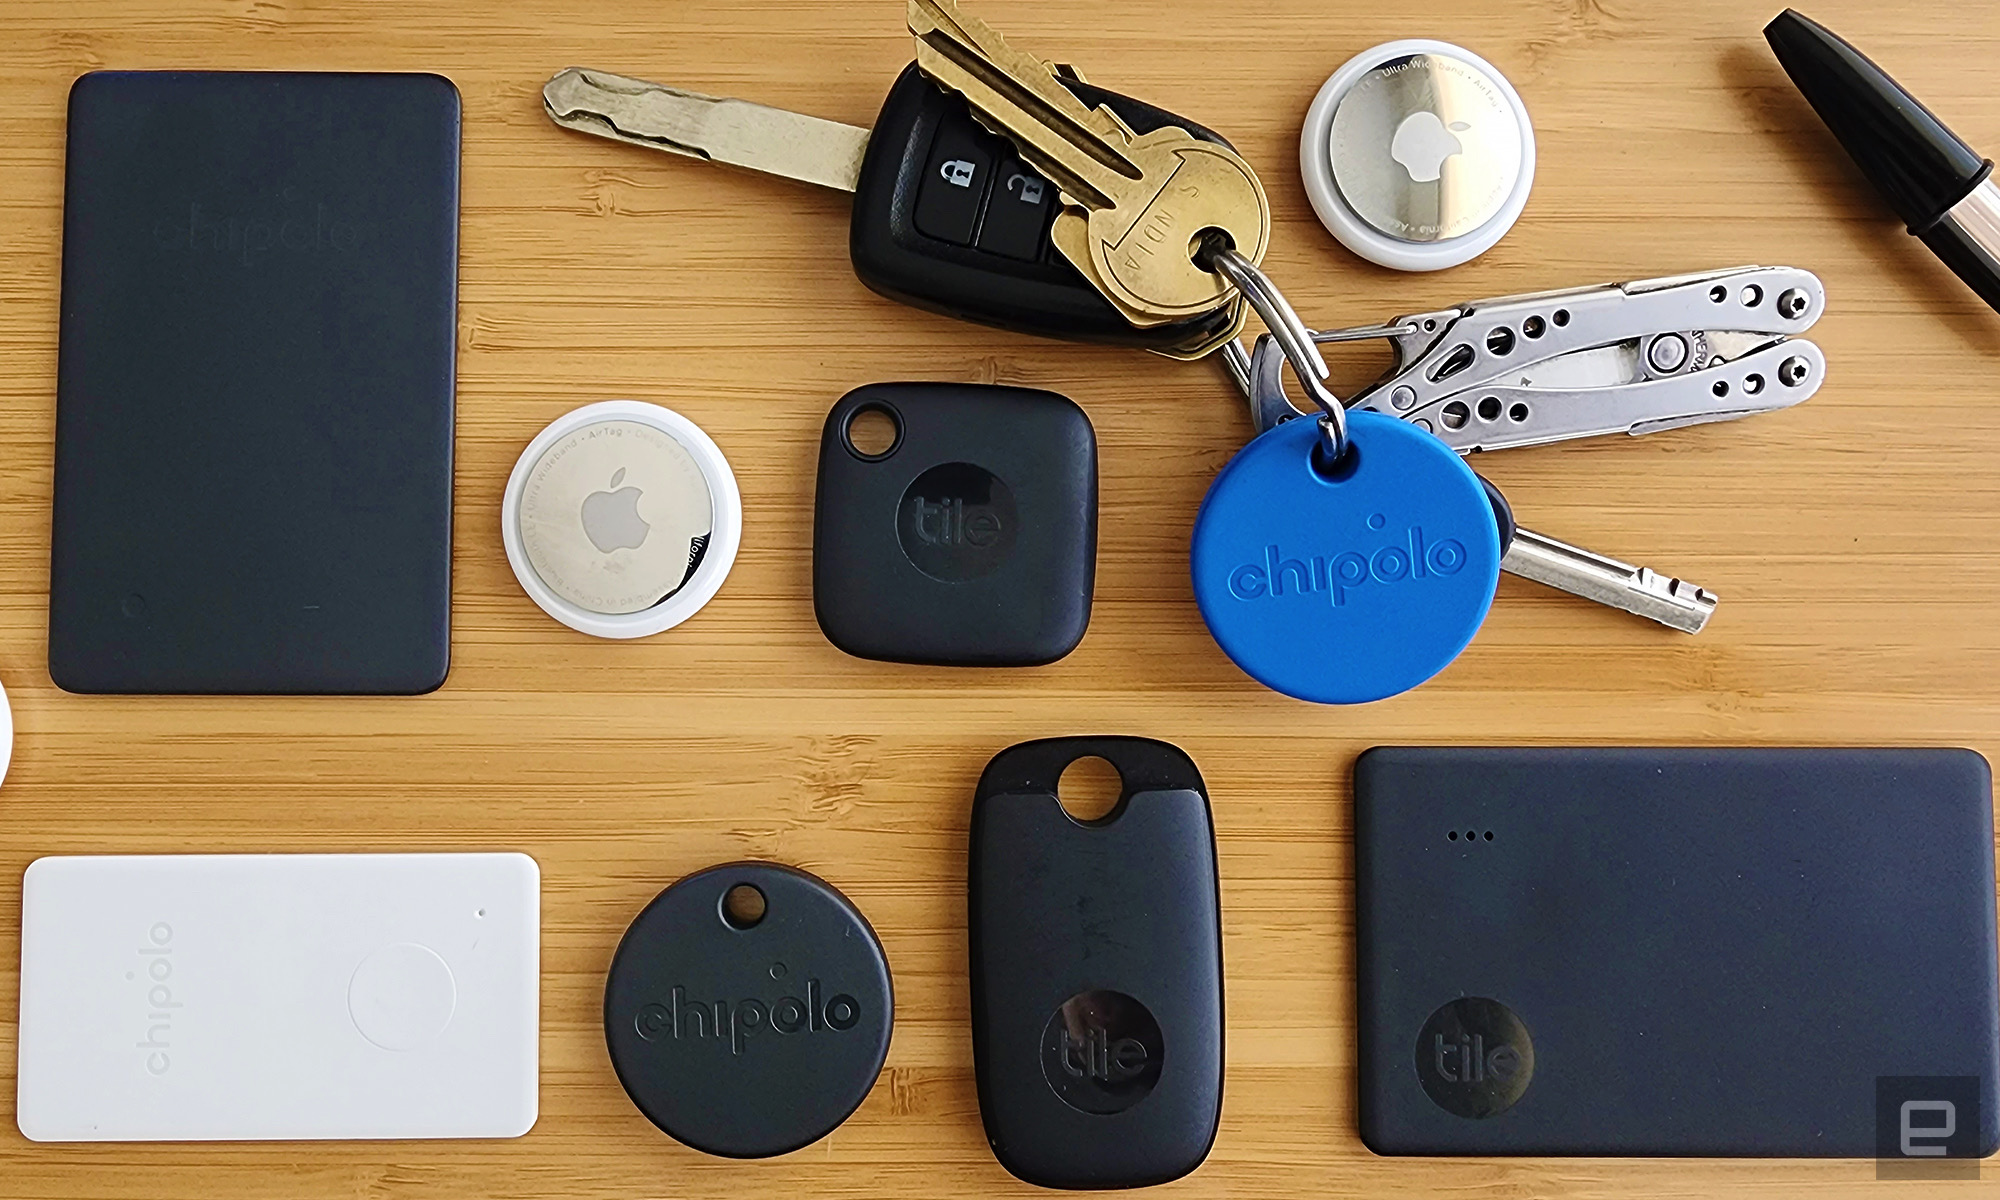 An assortment of bluetooth trackers arranged in a grid on a wooden background. Trackers include black Tile trackers in various shapes, two silver and white AirTag trackers and a round blue Chipolo tracker attached to a set of keys with a multitool key chain. " data-uuid="e92fd876-b075-3bd1-9c92-355d3b241508